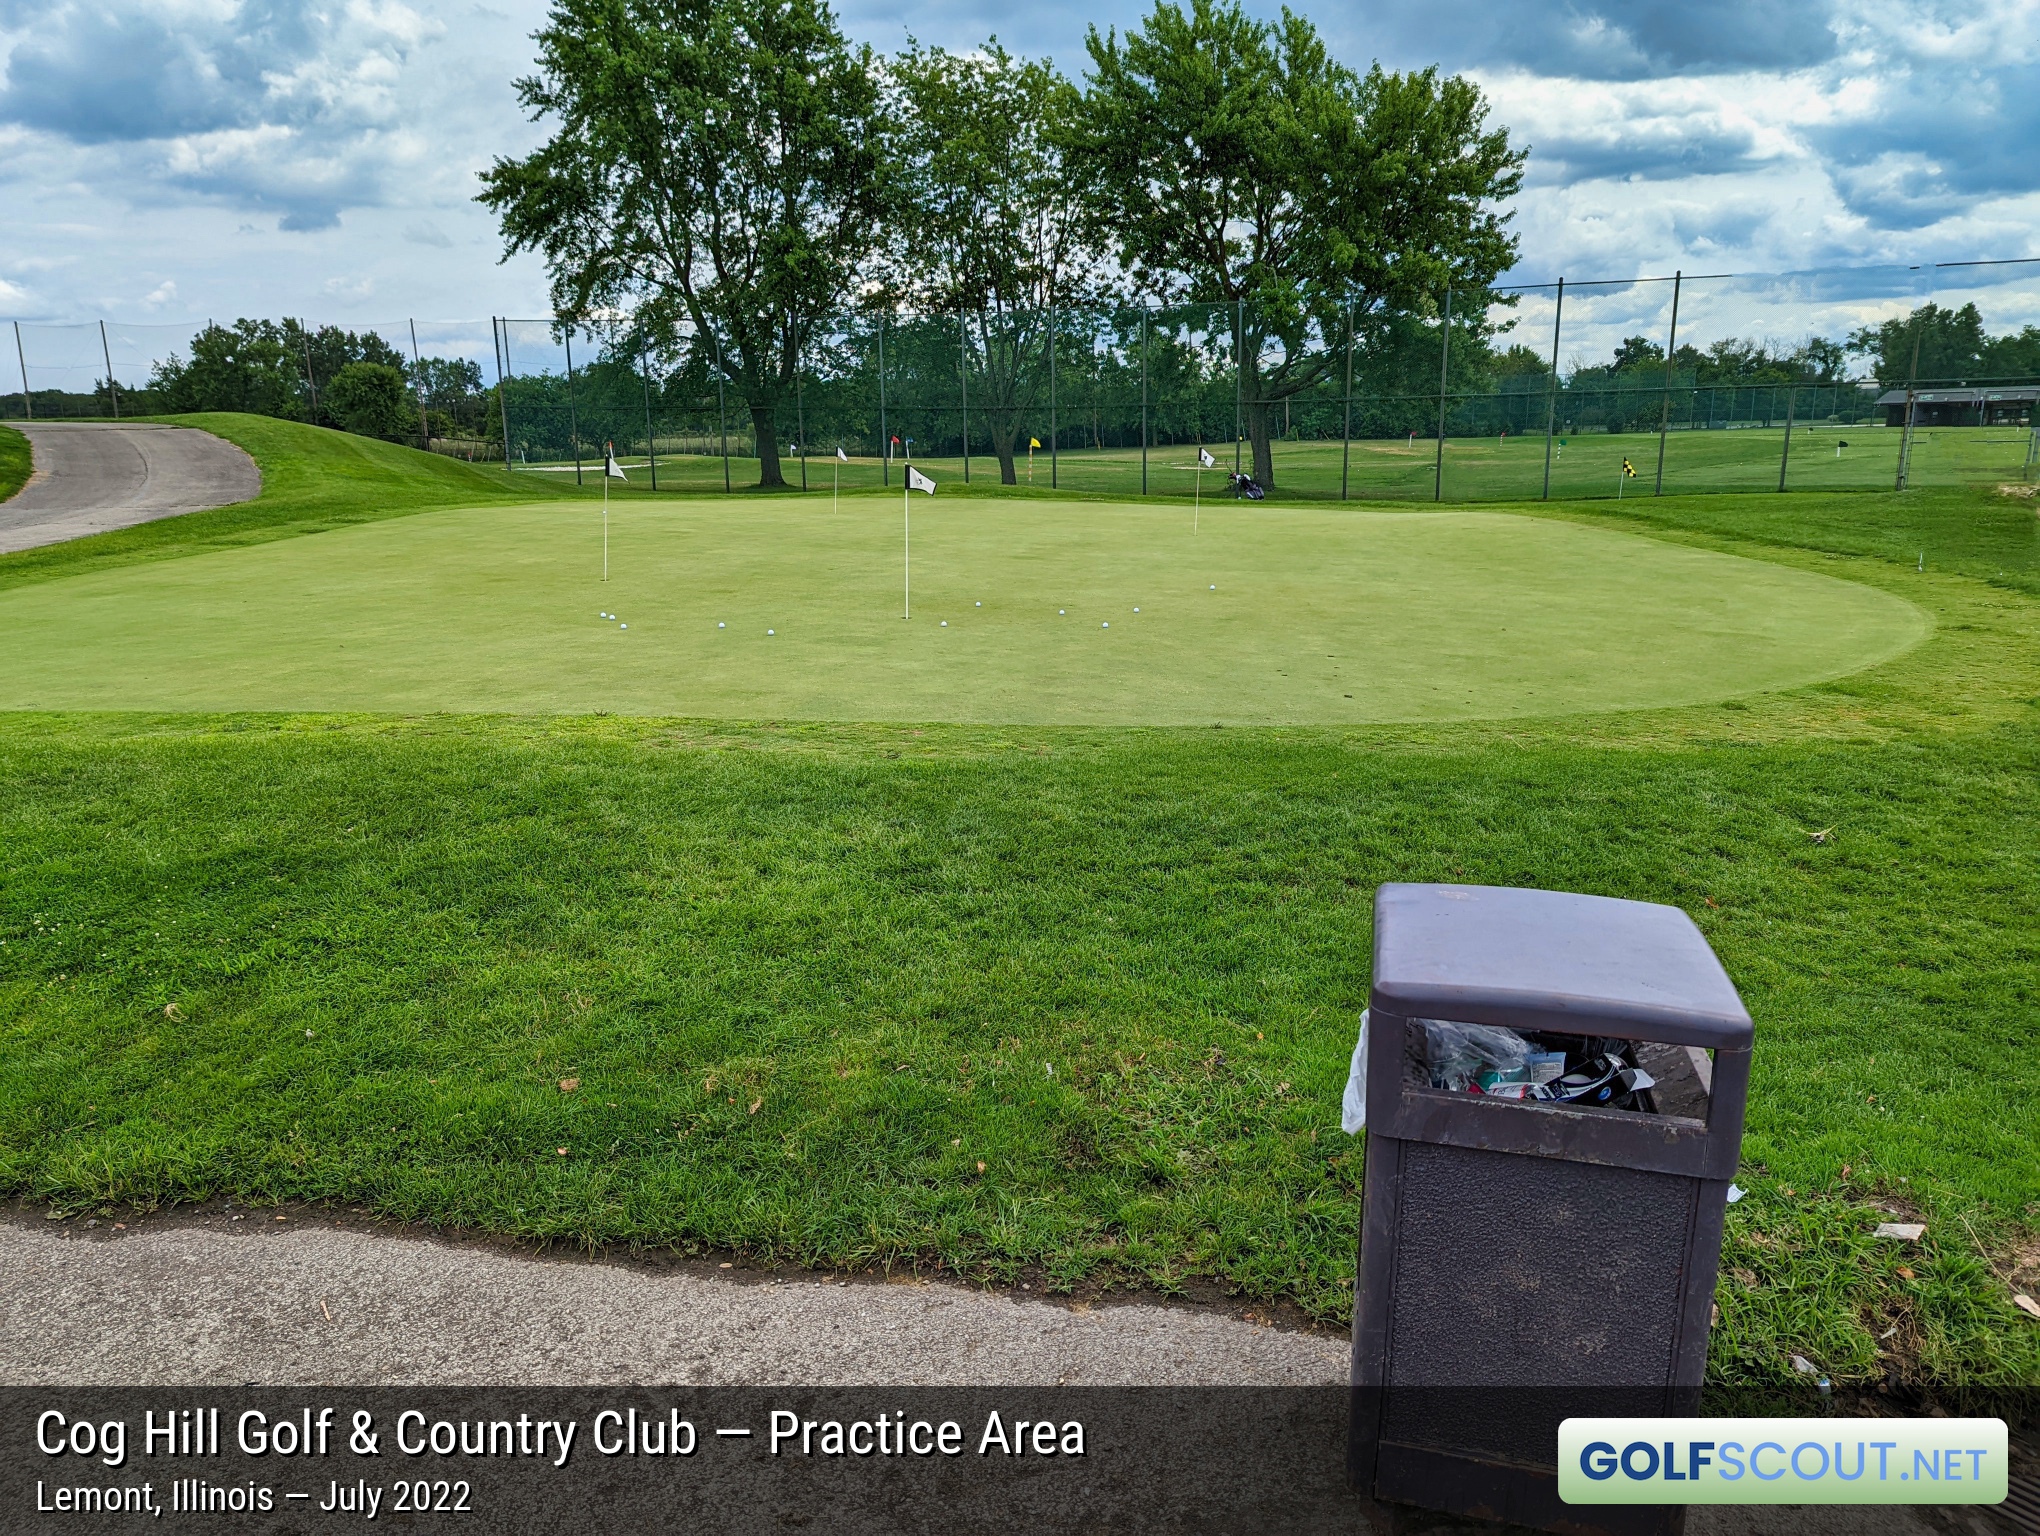 Photo of the practice area at Cog Hill Course #4 - Dubsdread in Lemont, Illinois. Another practice green, to the left of the range, when facing it from the parking lot.